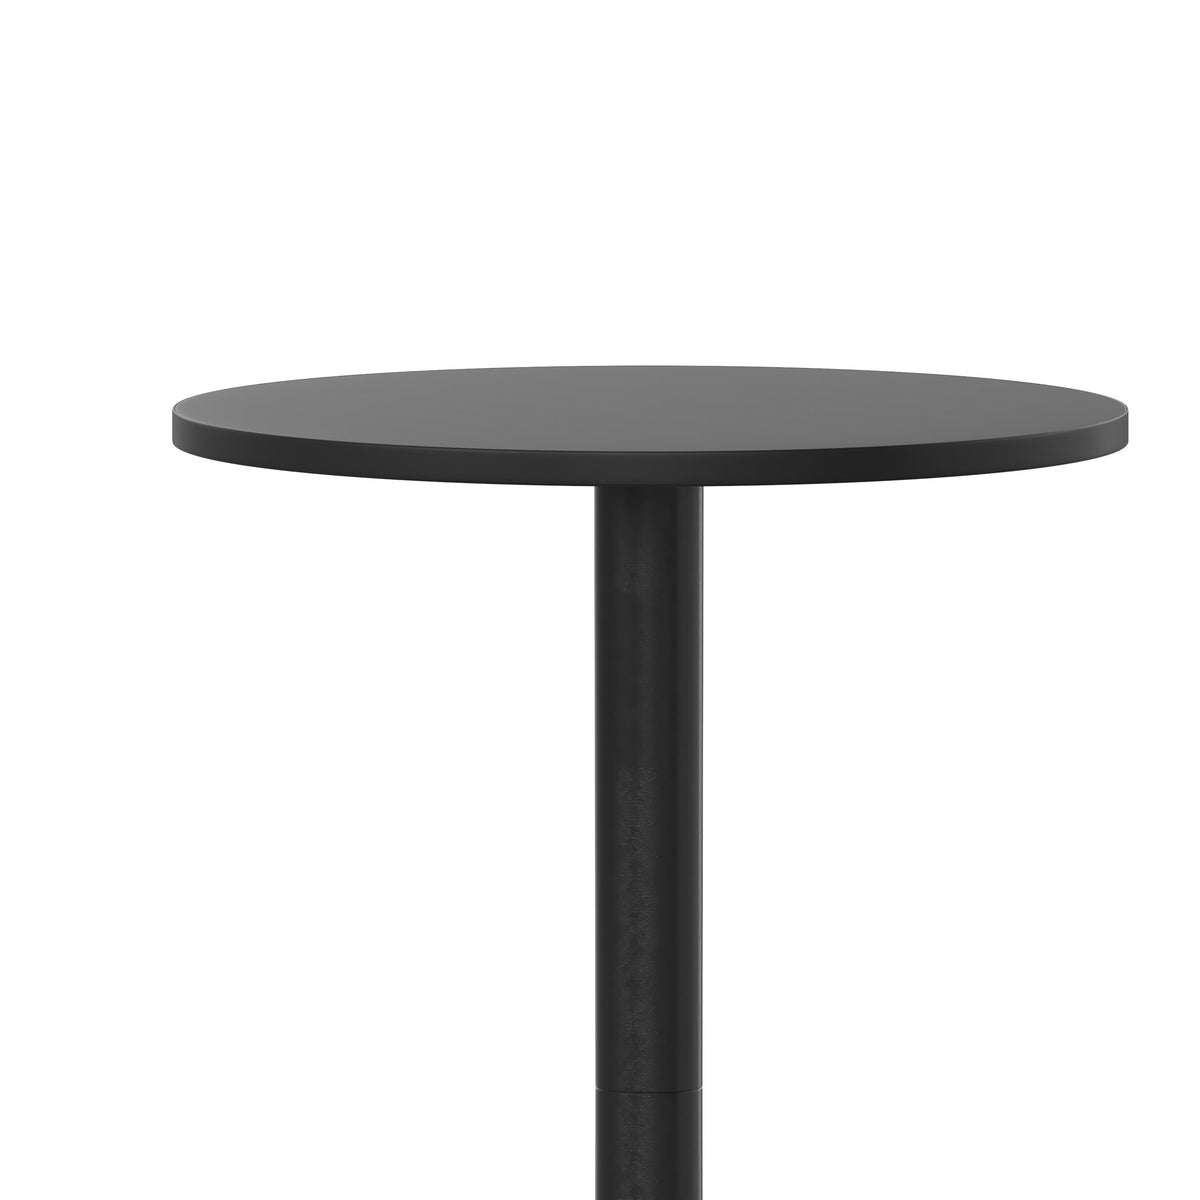 Black |#| 23.25inch Round Aluminum Indoor-Outdoor Bar Height Table with Flip-Up Table - Black